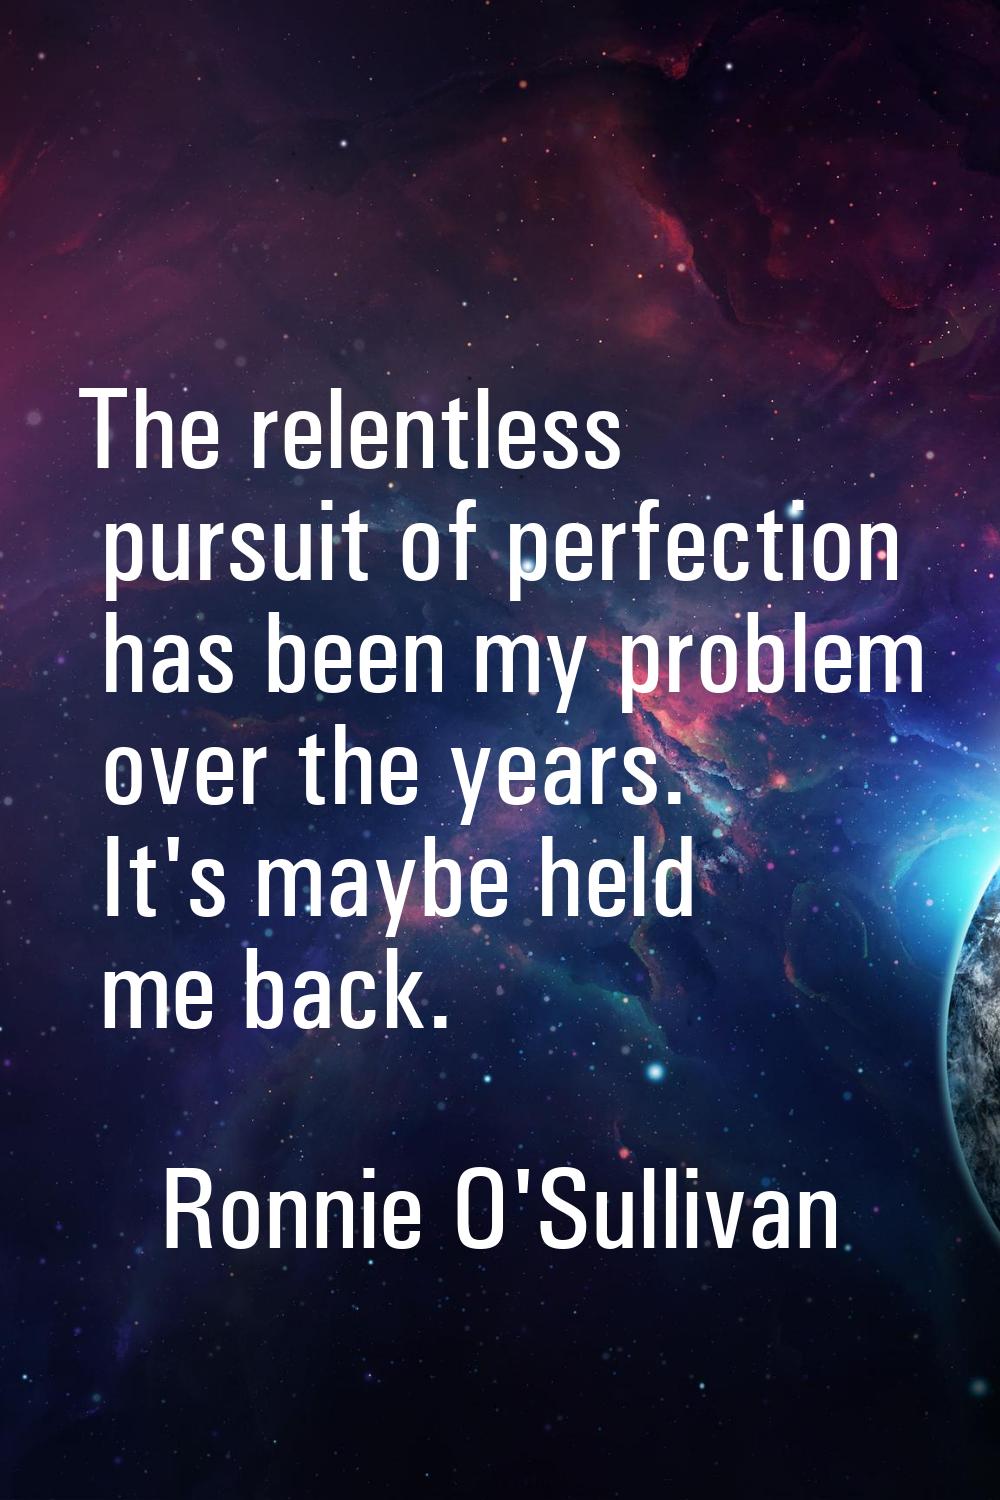 The relentless pursuit of perfection has been my problem over the years. It's maybe held me back.